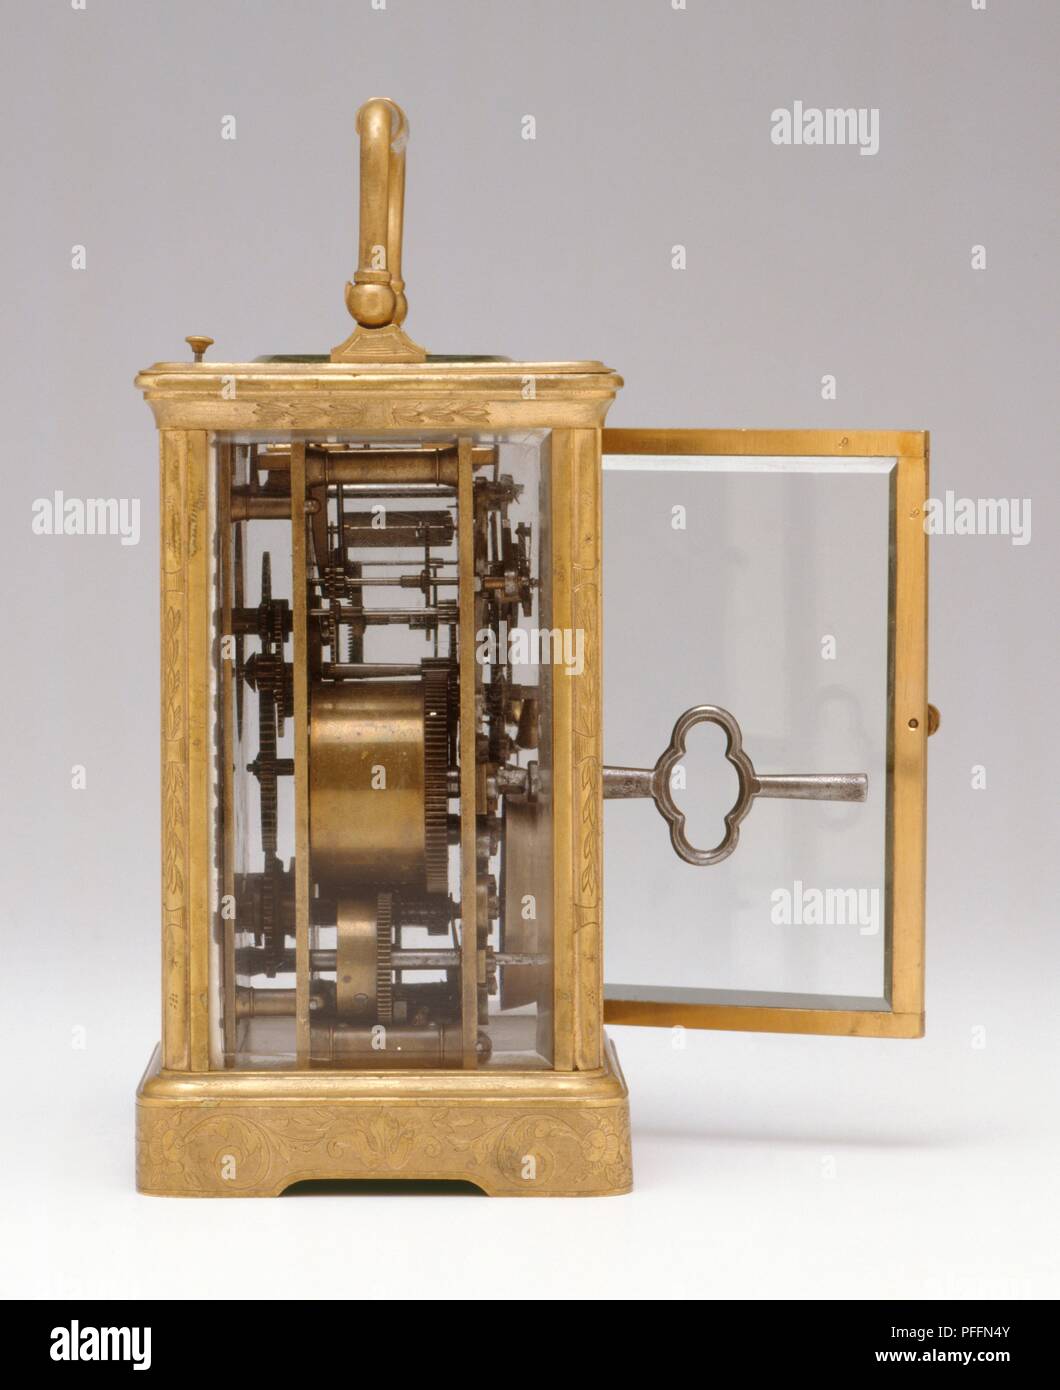 Carriage clock showing inside mechanism and key for winding up, side view Stock Photo